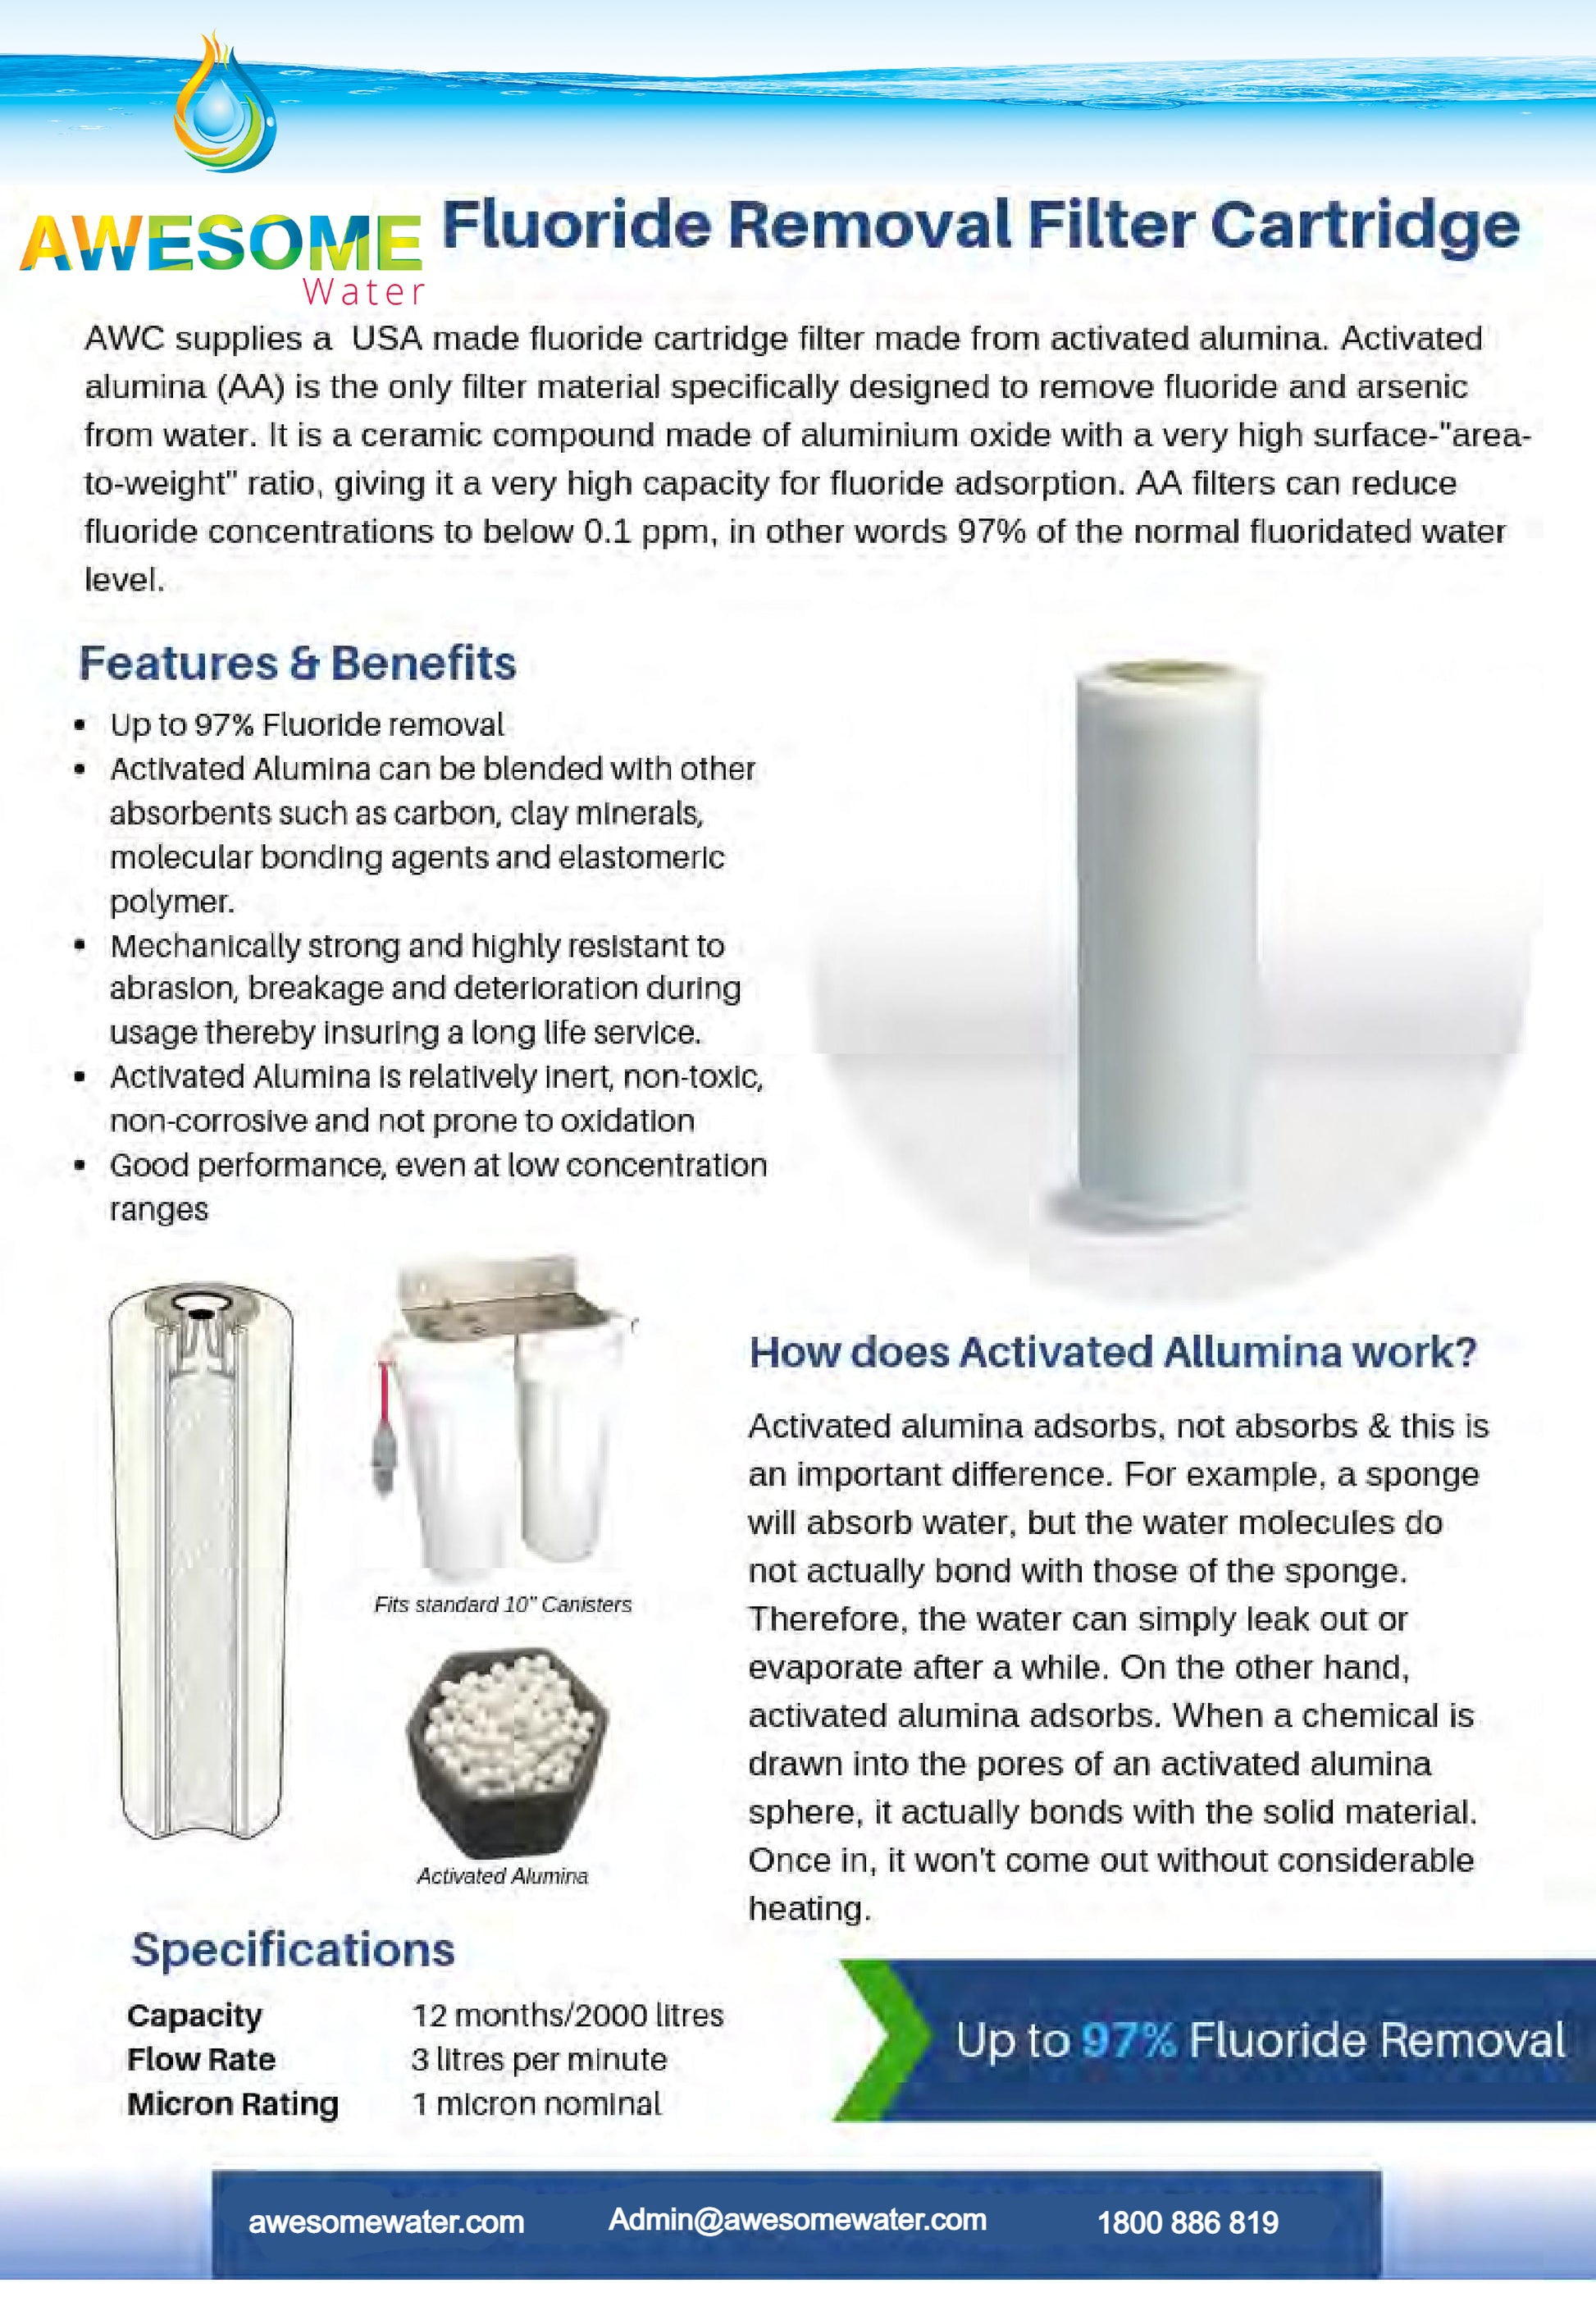 AWESOME WATER® - Fluoride Removal Filter - Awesome Water